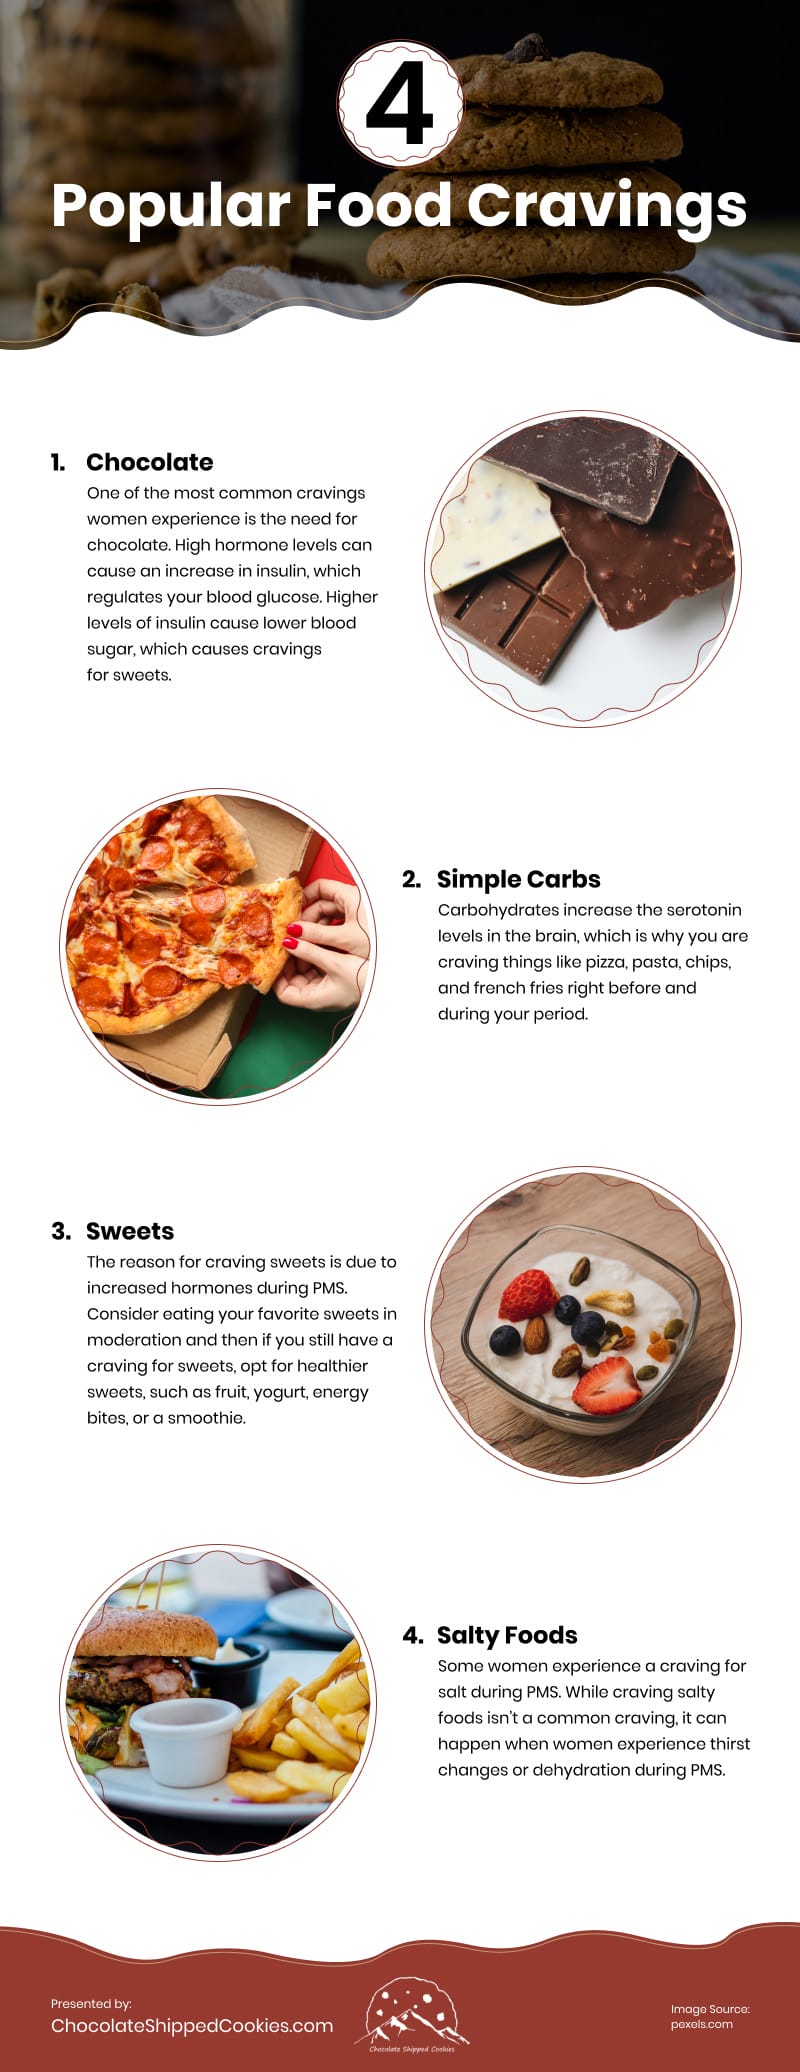 4 Popular Food Cravings Infographic